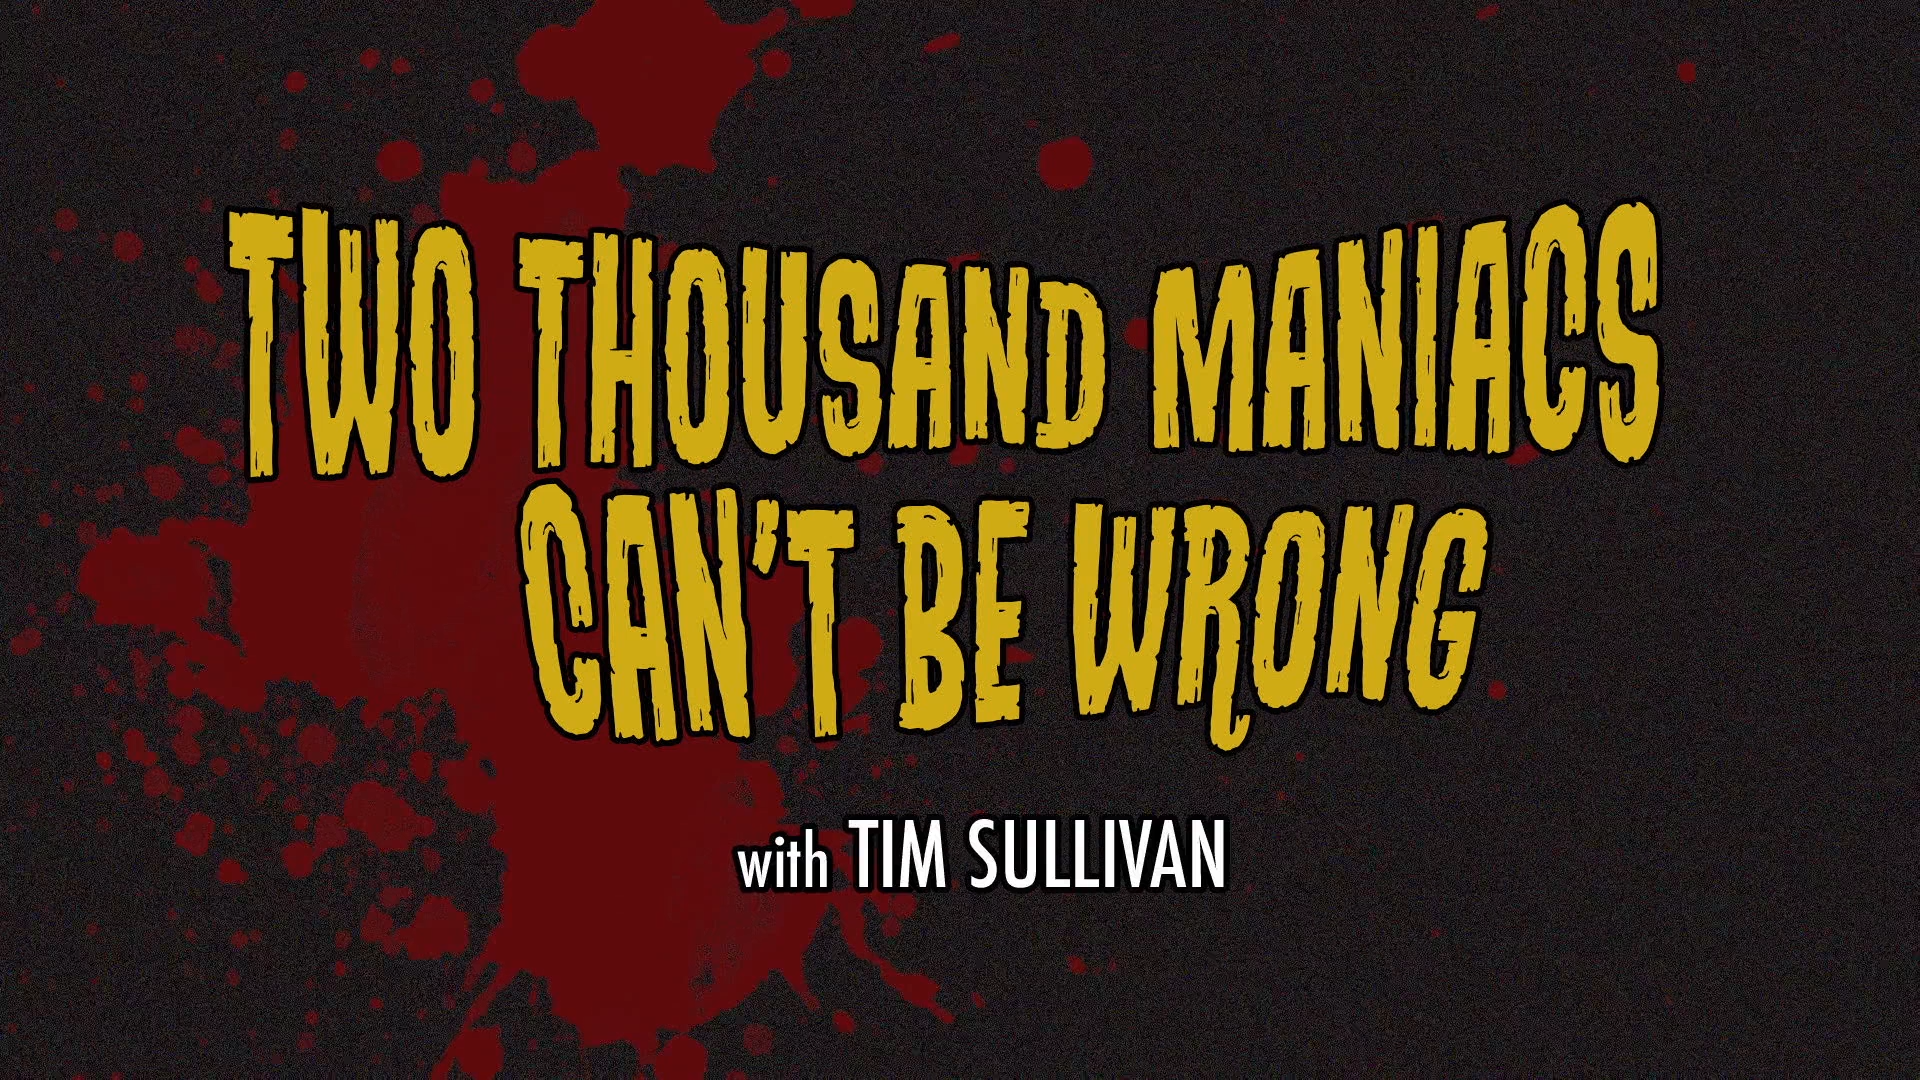 Two Thousand Maniacs! by Herschell Gordon Lewis